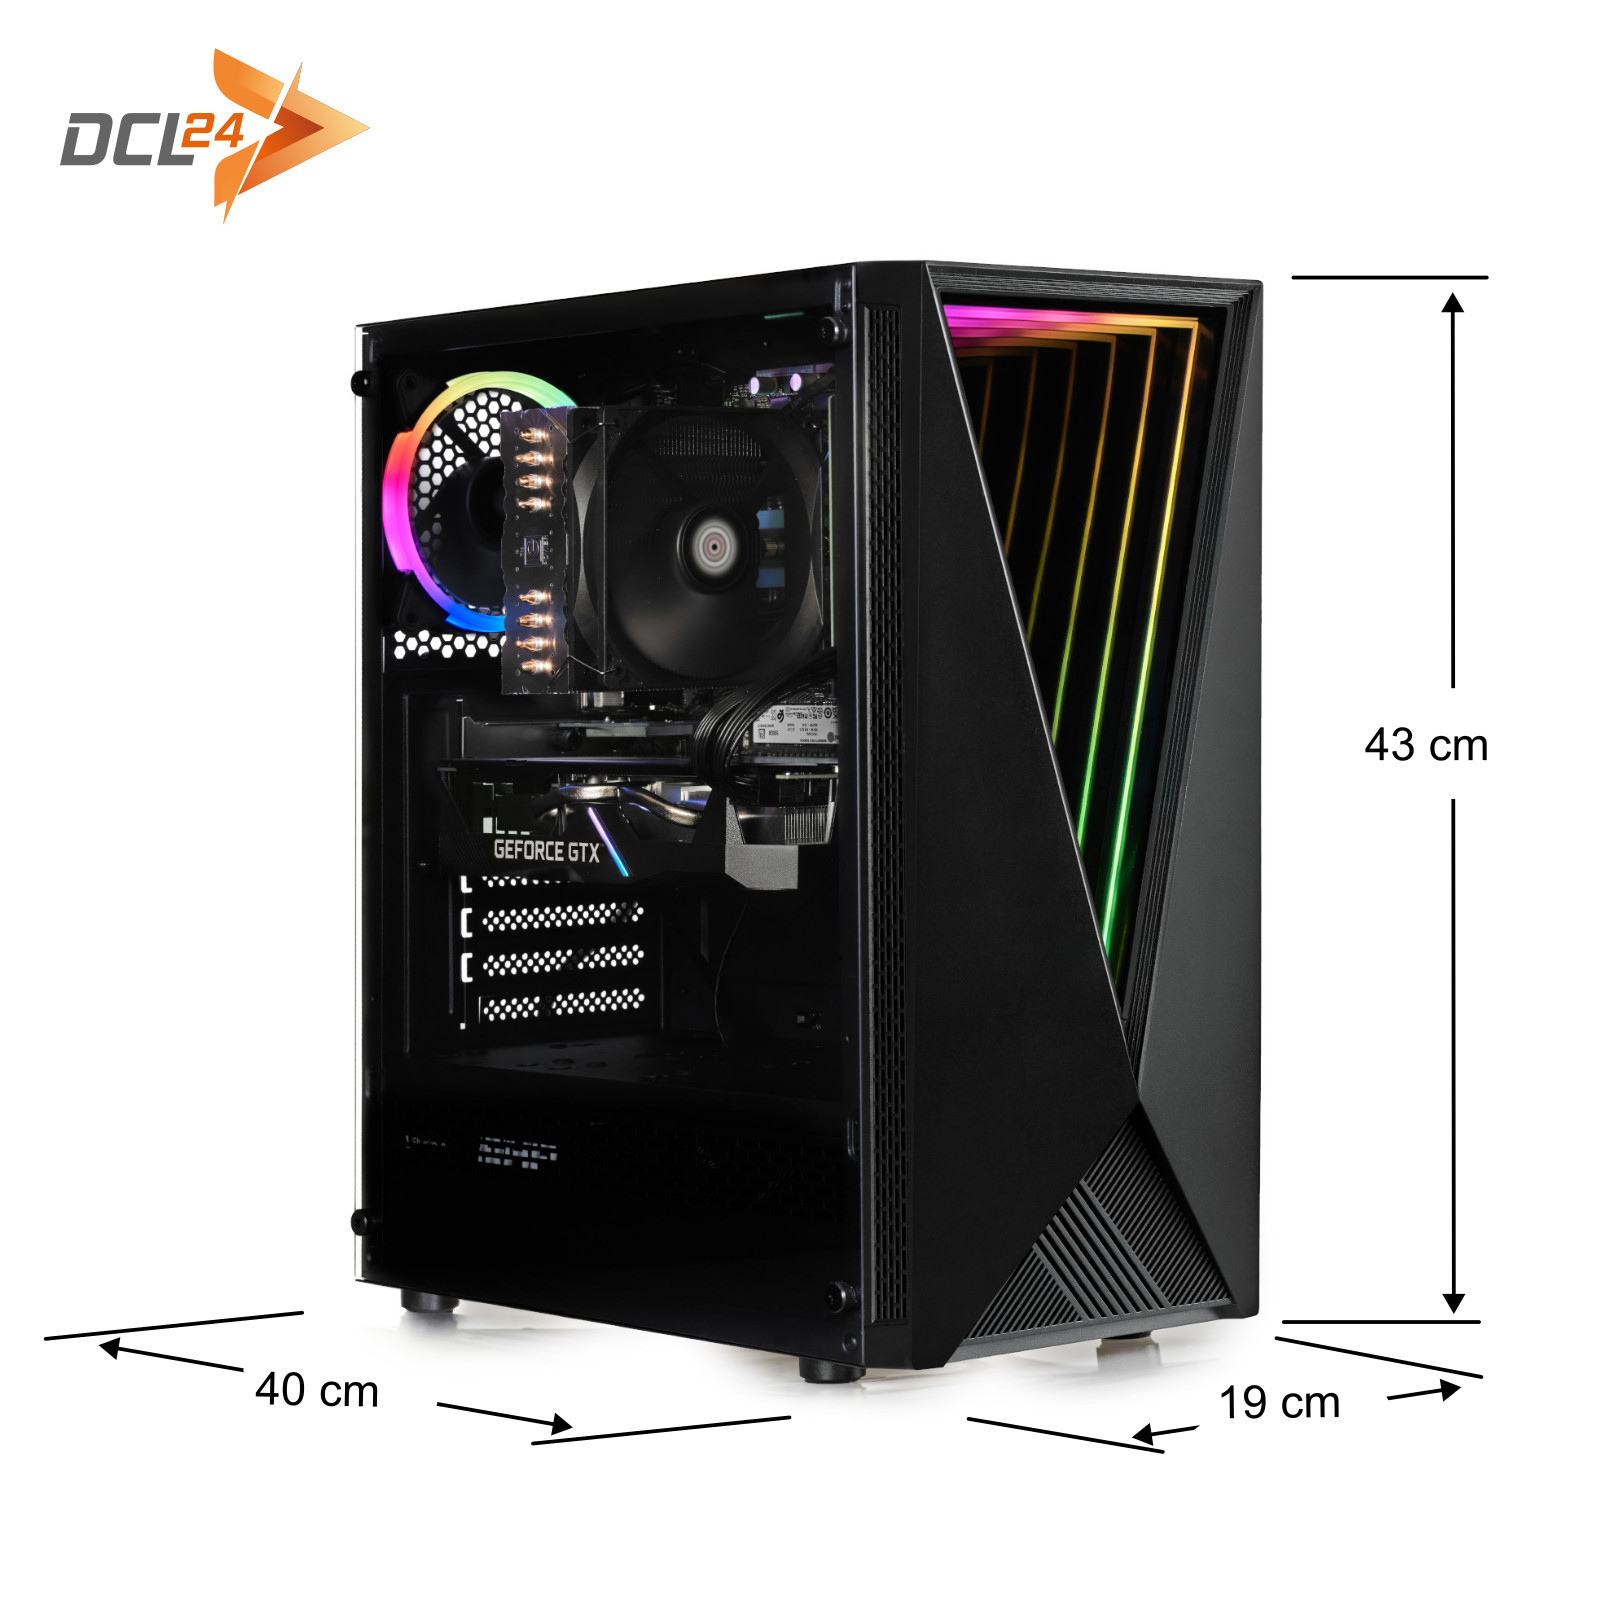 DCL24 Void, Gaming SSD 1000 16 PC, GB GB RAM